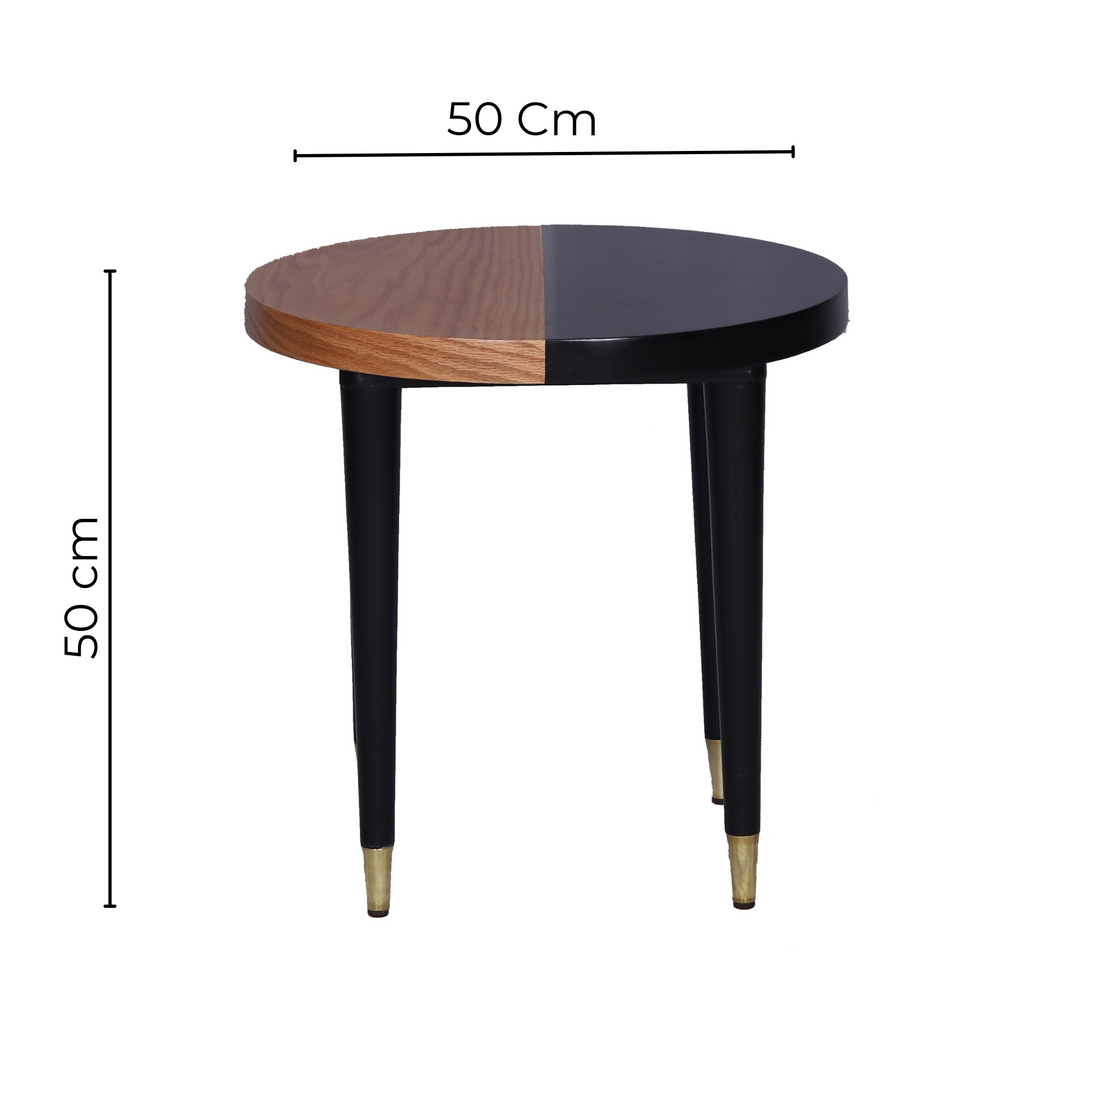 Lady Suzanne - Side Table